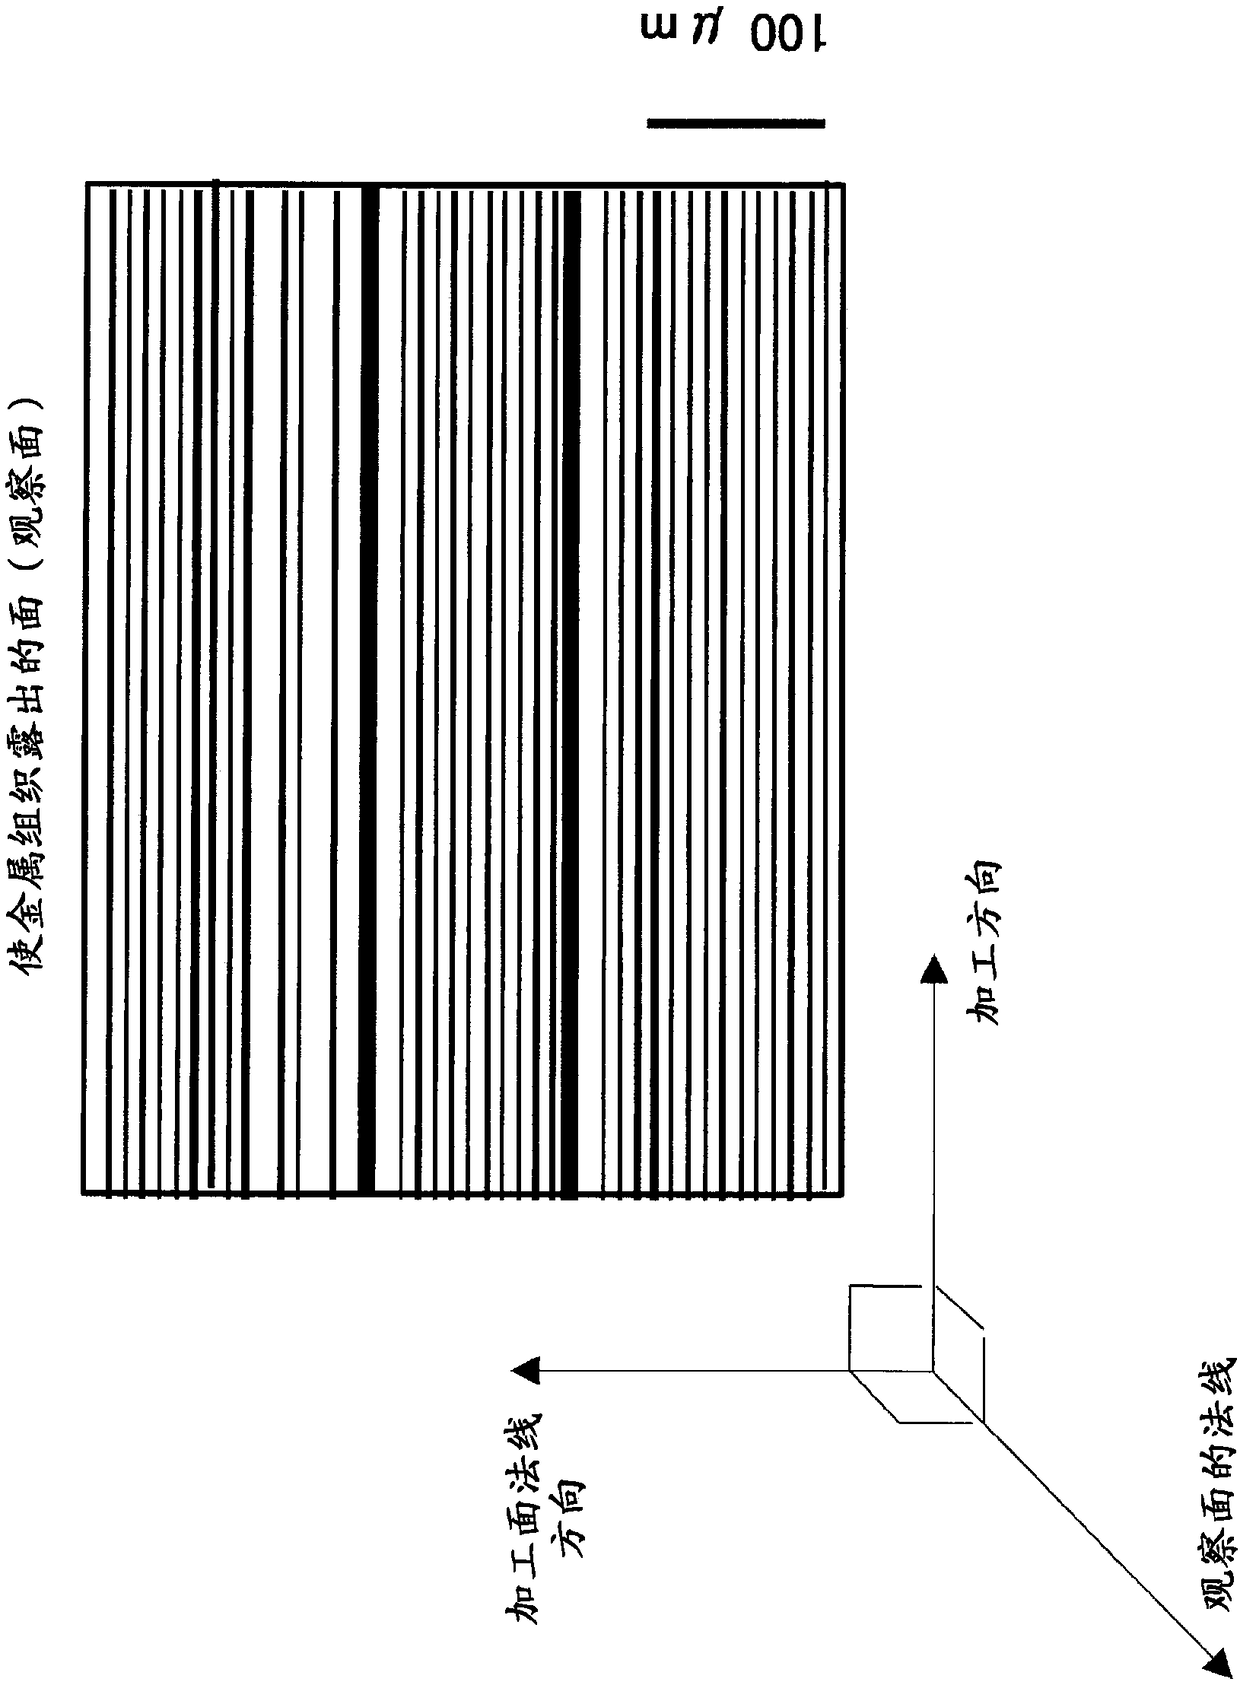 Al-mg-si-based alloy material, al-mg-si-based alloy plate, and method for manufacturing al-mg-si-based alloy plate